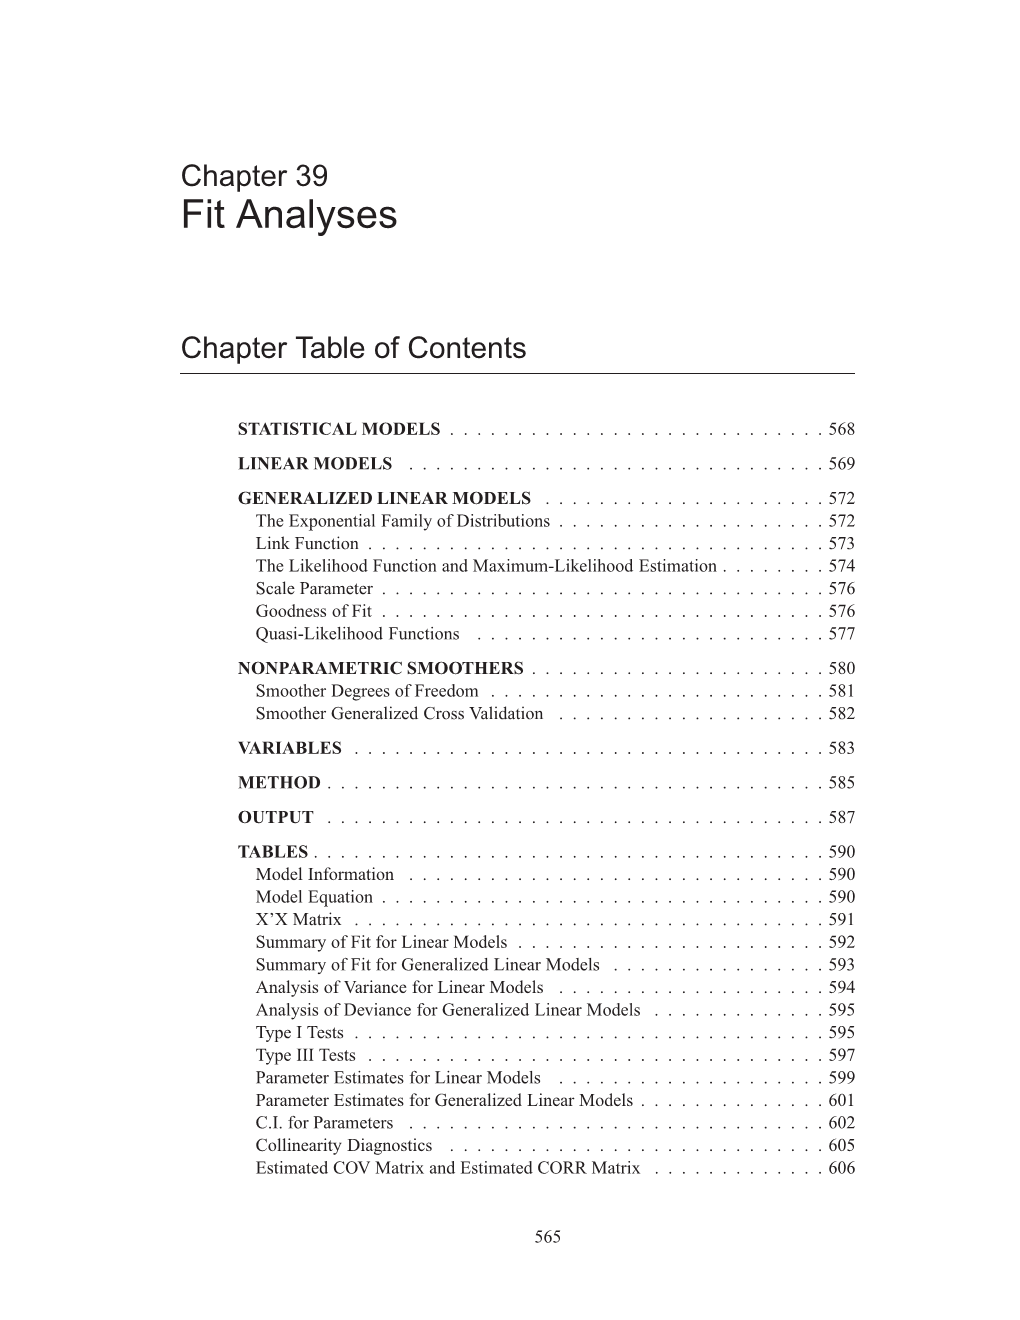 Chapter 39 Fit Analyses